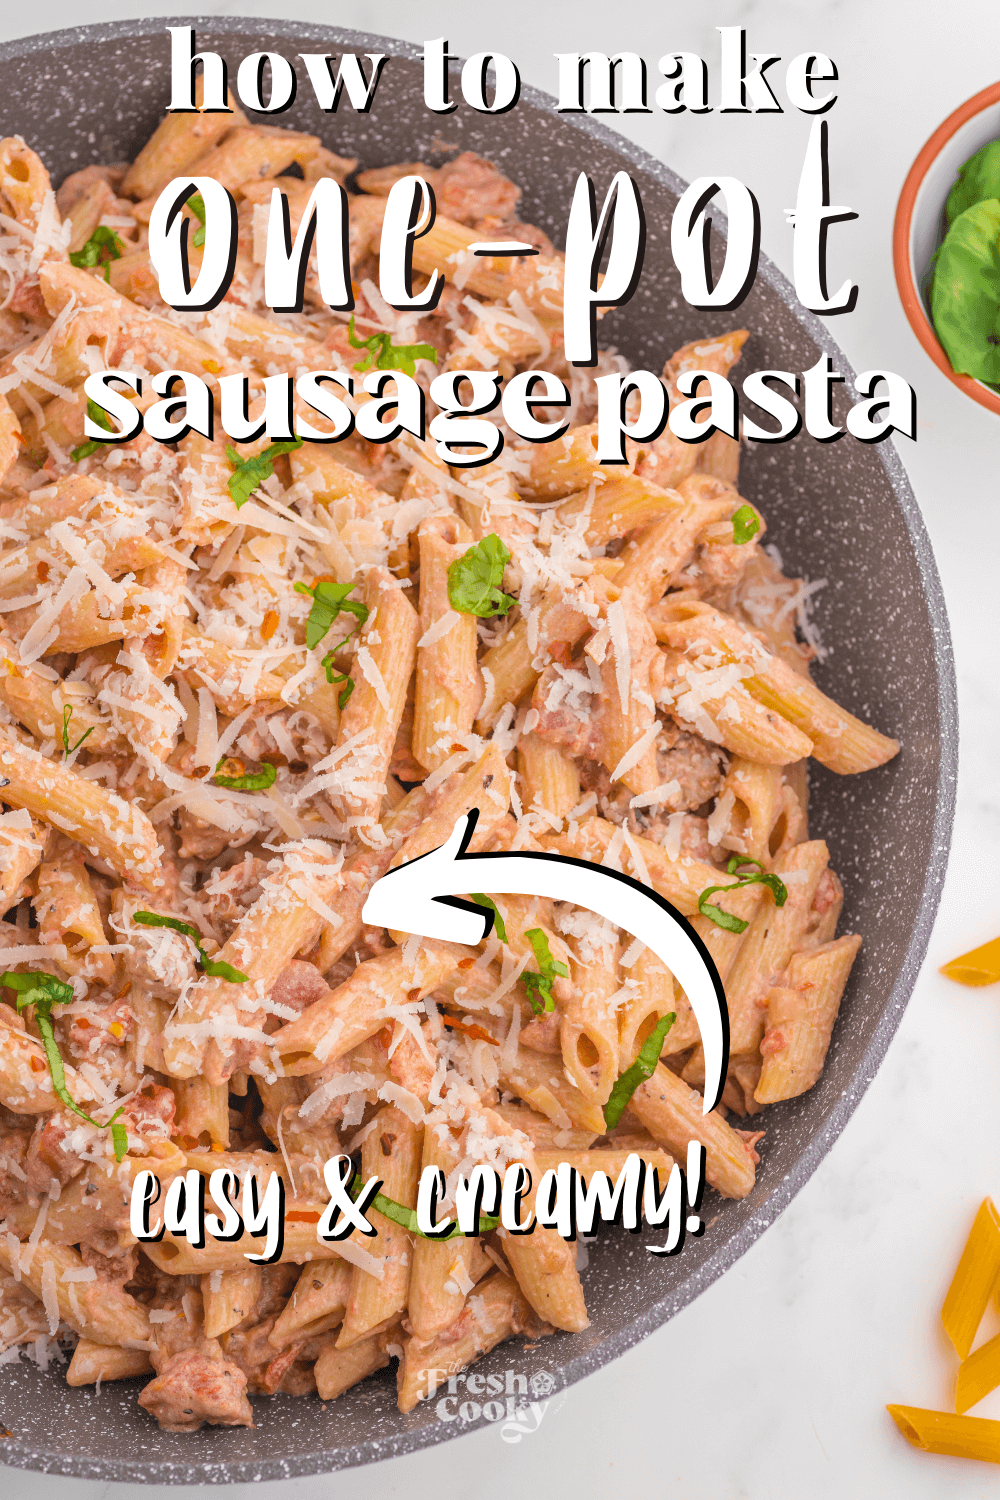 Skillet filled with creamy, one pot pasta with Italian sausage in a creamy, parmesan tomato sauce.